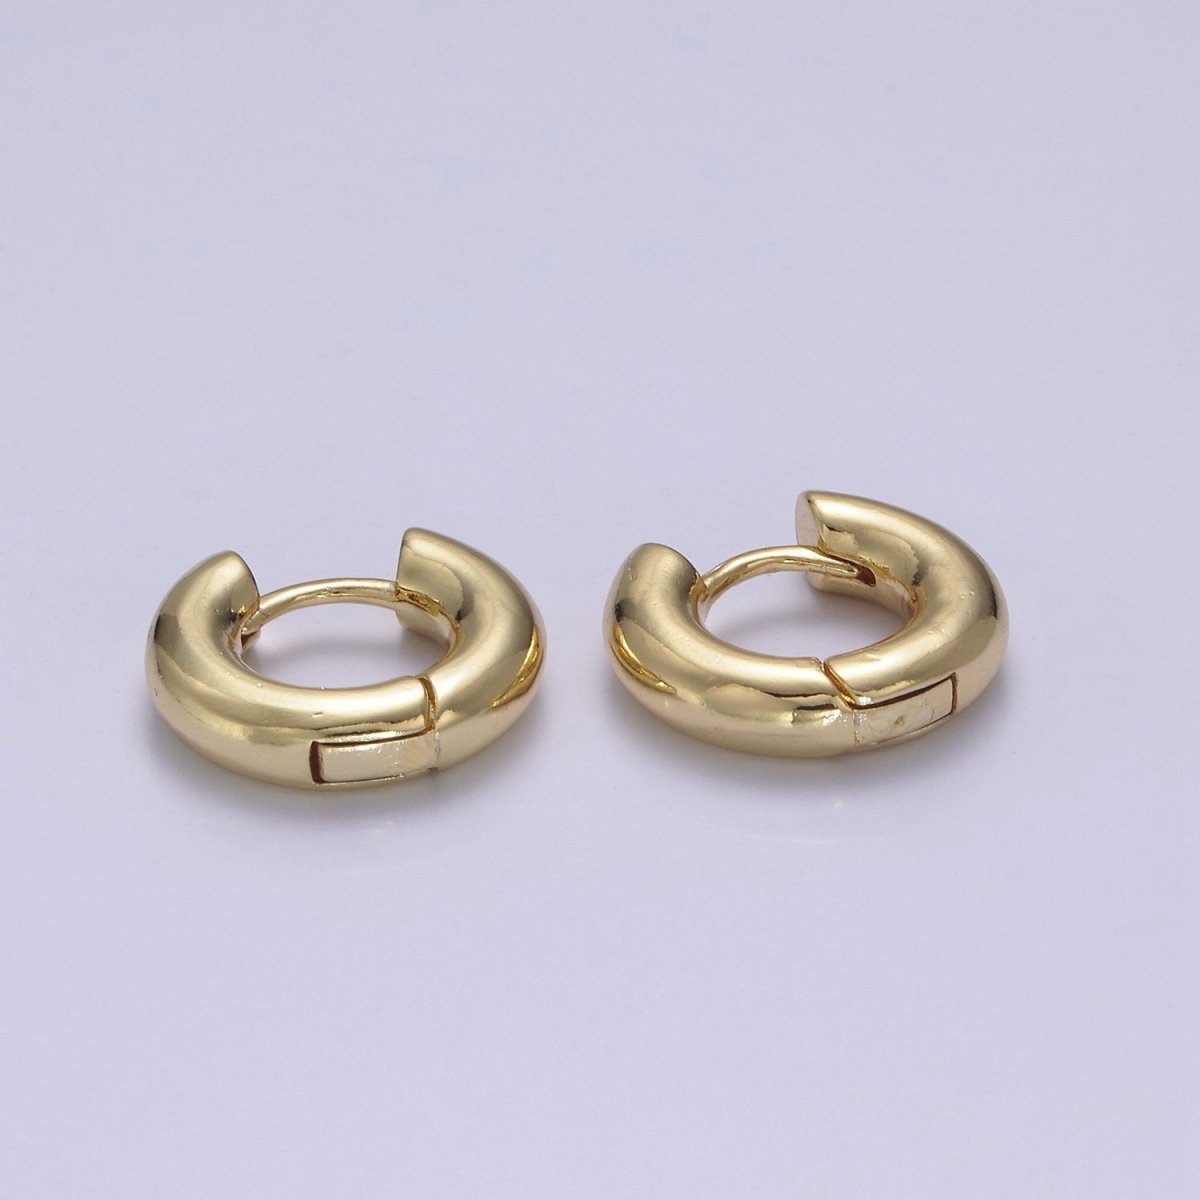 Minimalist Earring Gold Hoop Earrings • Perfect Simple Earrings For Her • Gifts for Her T-362, T-363 - DLUXCA